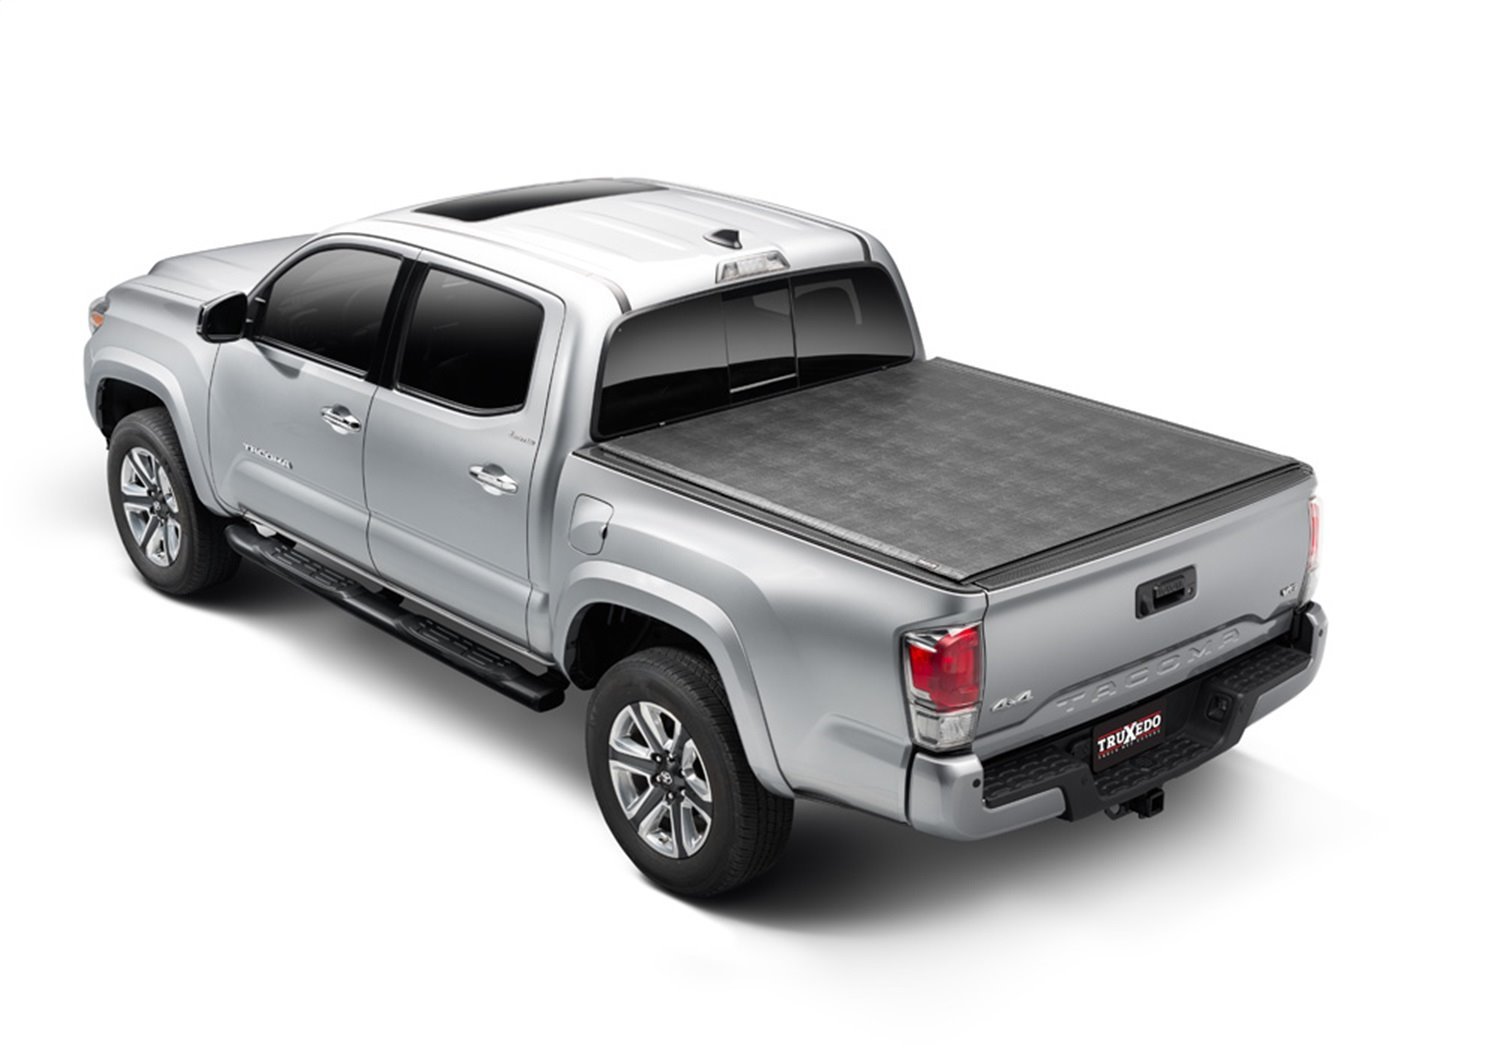 Sentry Roll-Up Tonneau Cover Fits Select Toyota Tundra, Without Deck Rail System, Bed Length: 6 ft. 6 in.